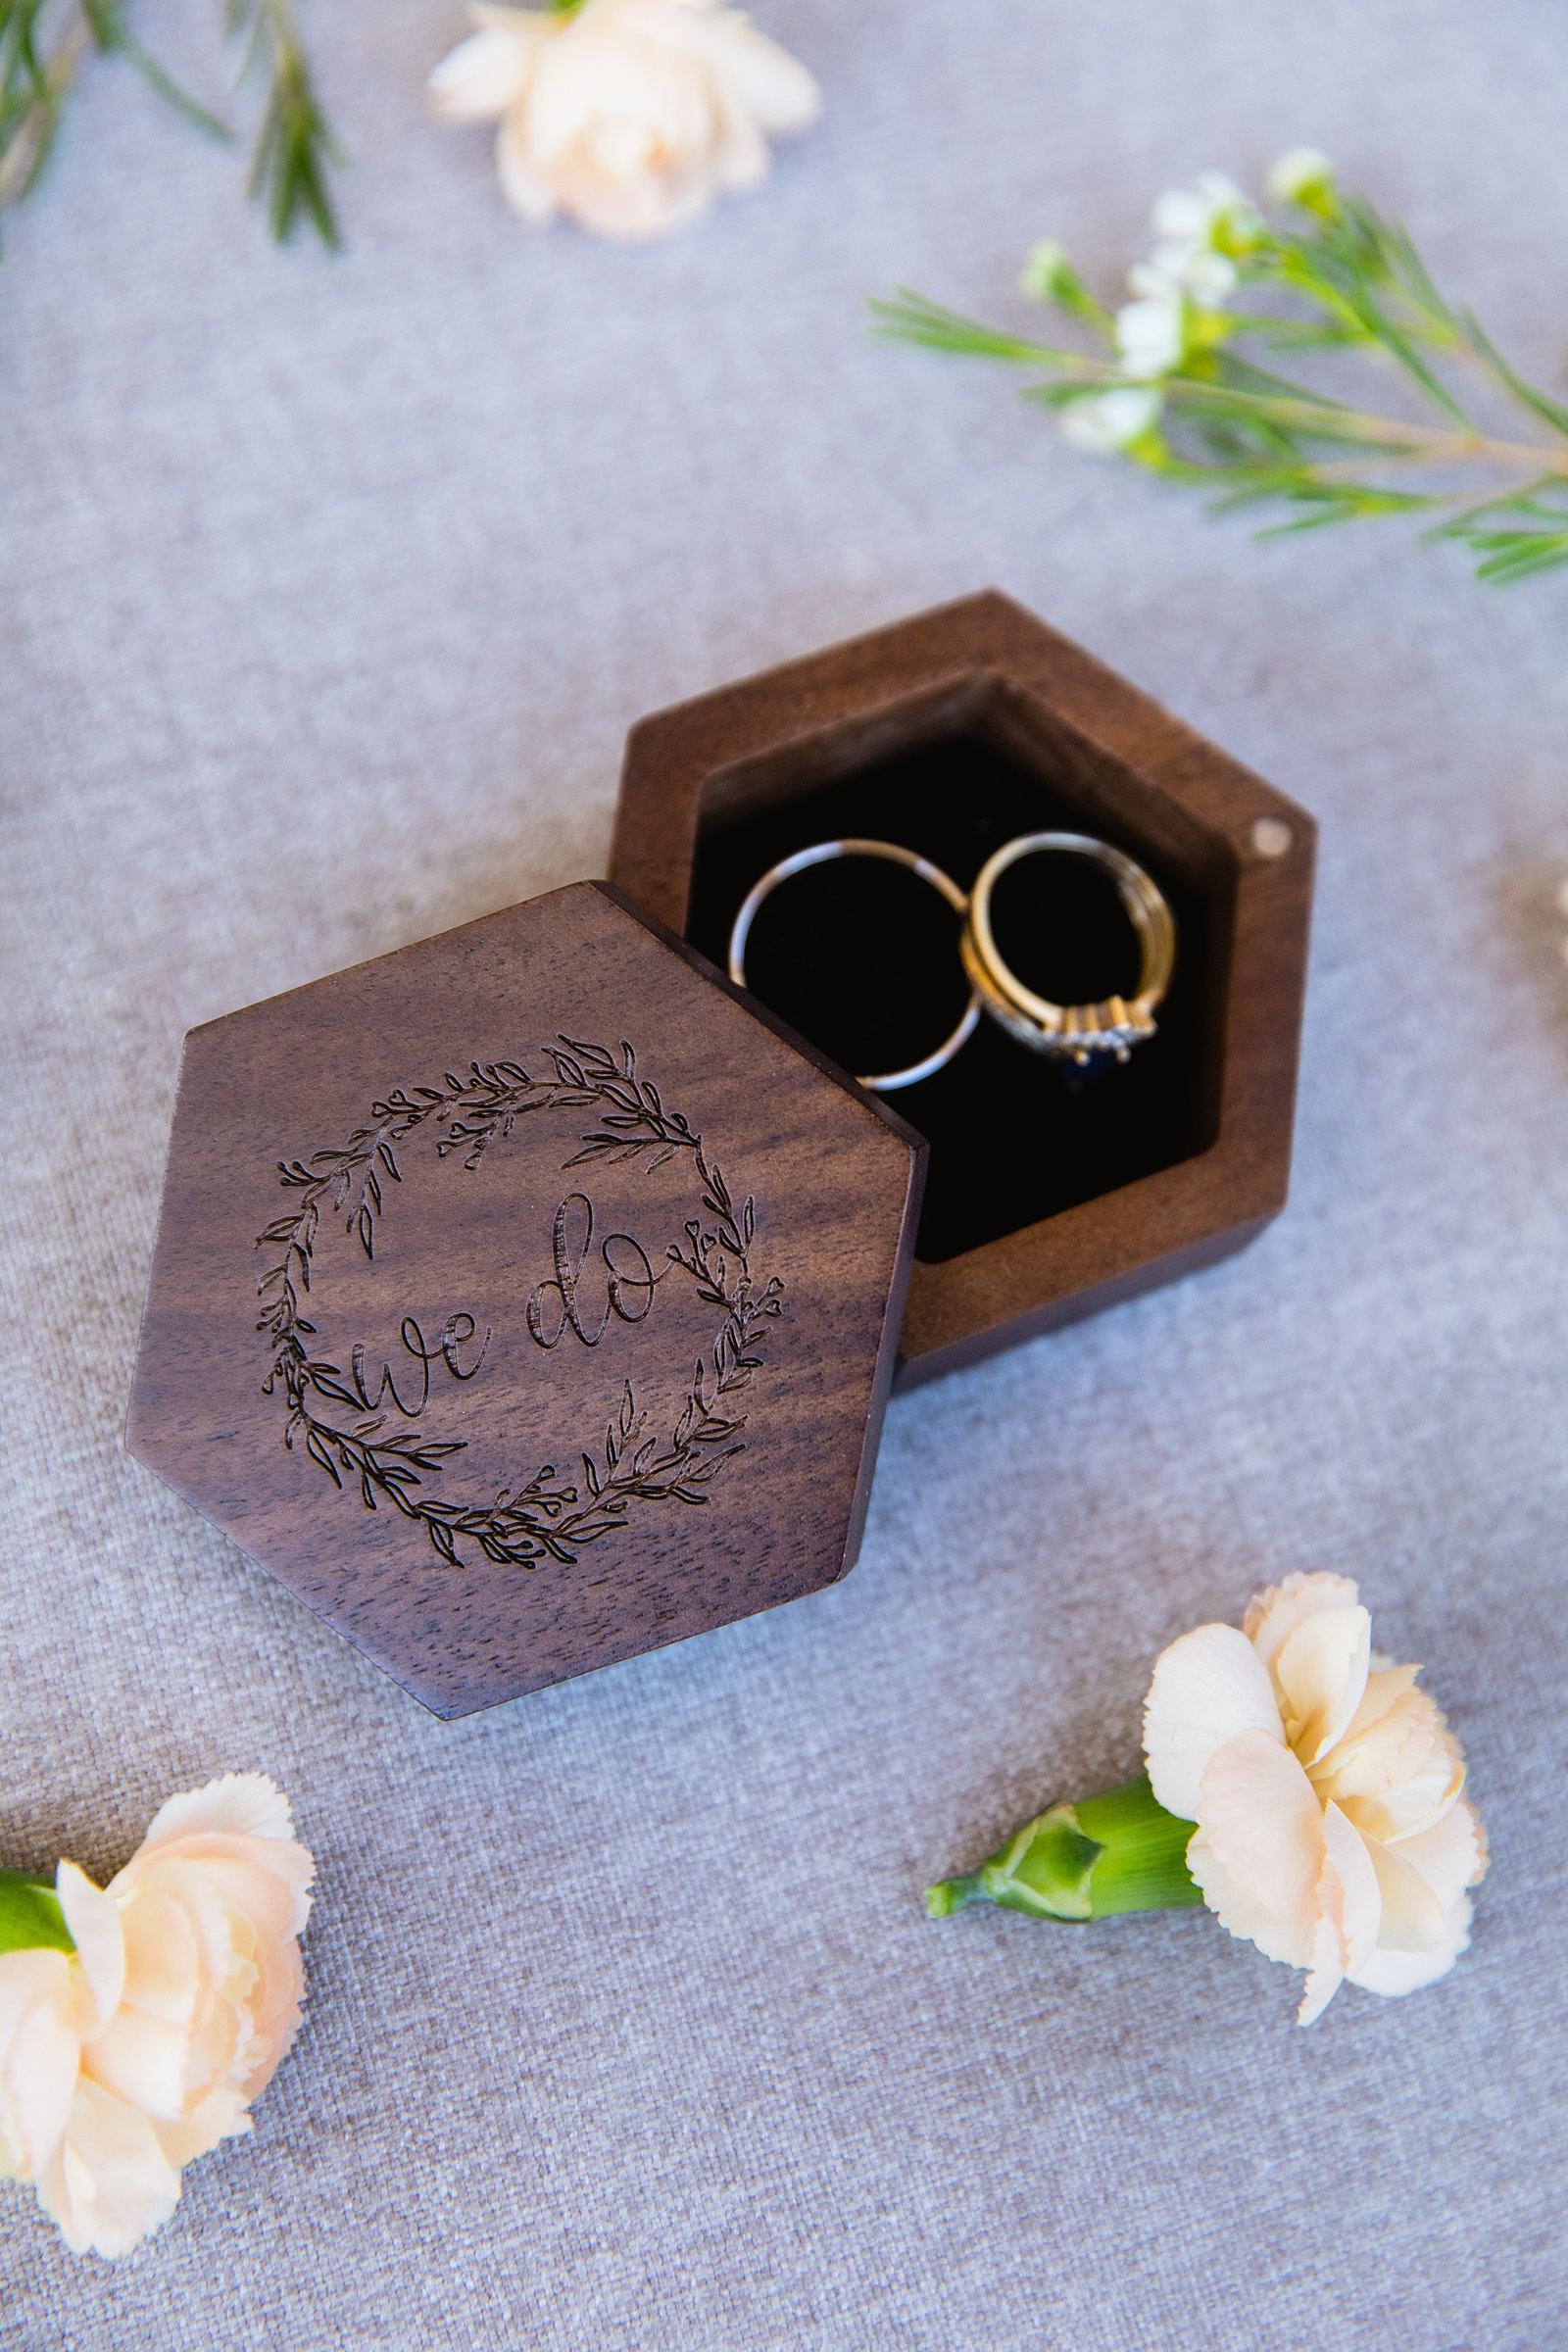 Rustic garden hexagon ring box with floral and "we do" engraved by Arizona wedding photographer PMA Photography.